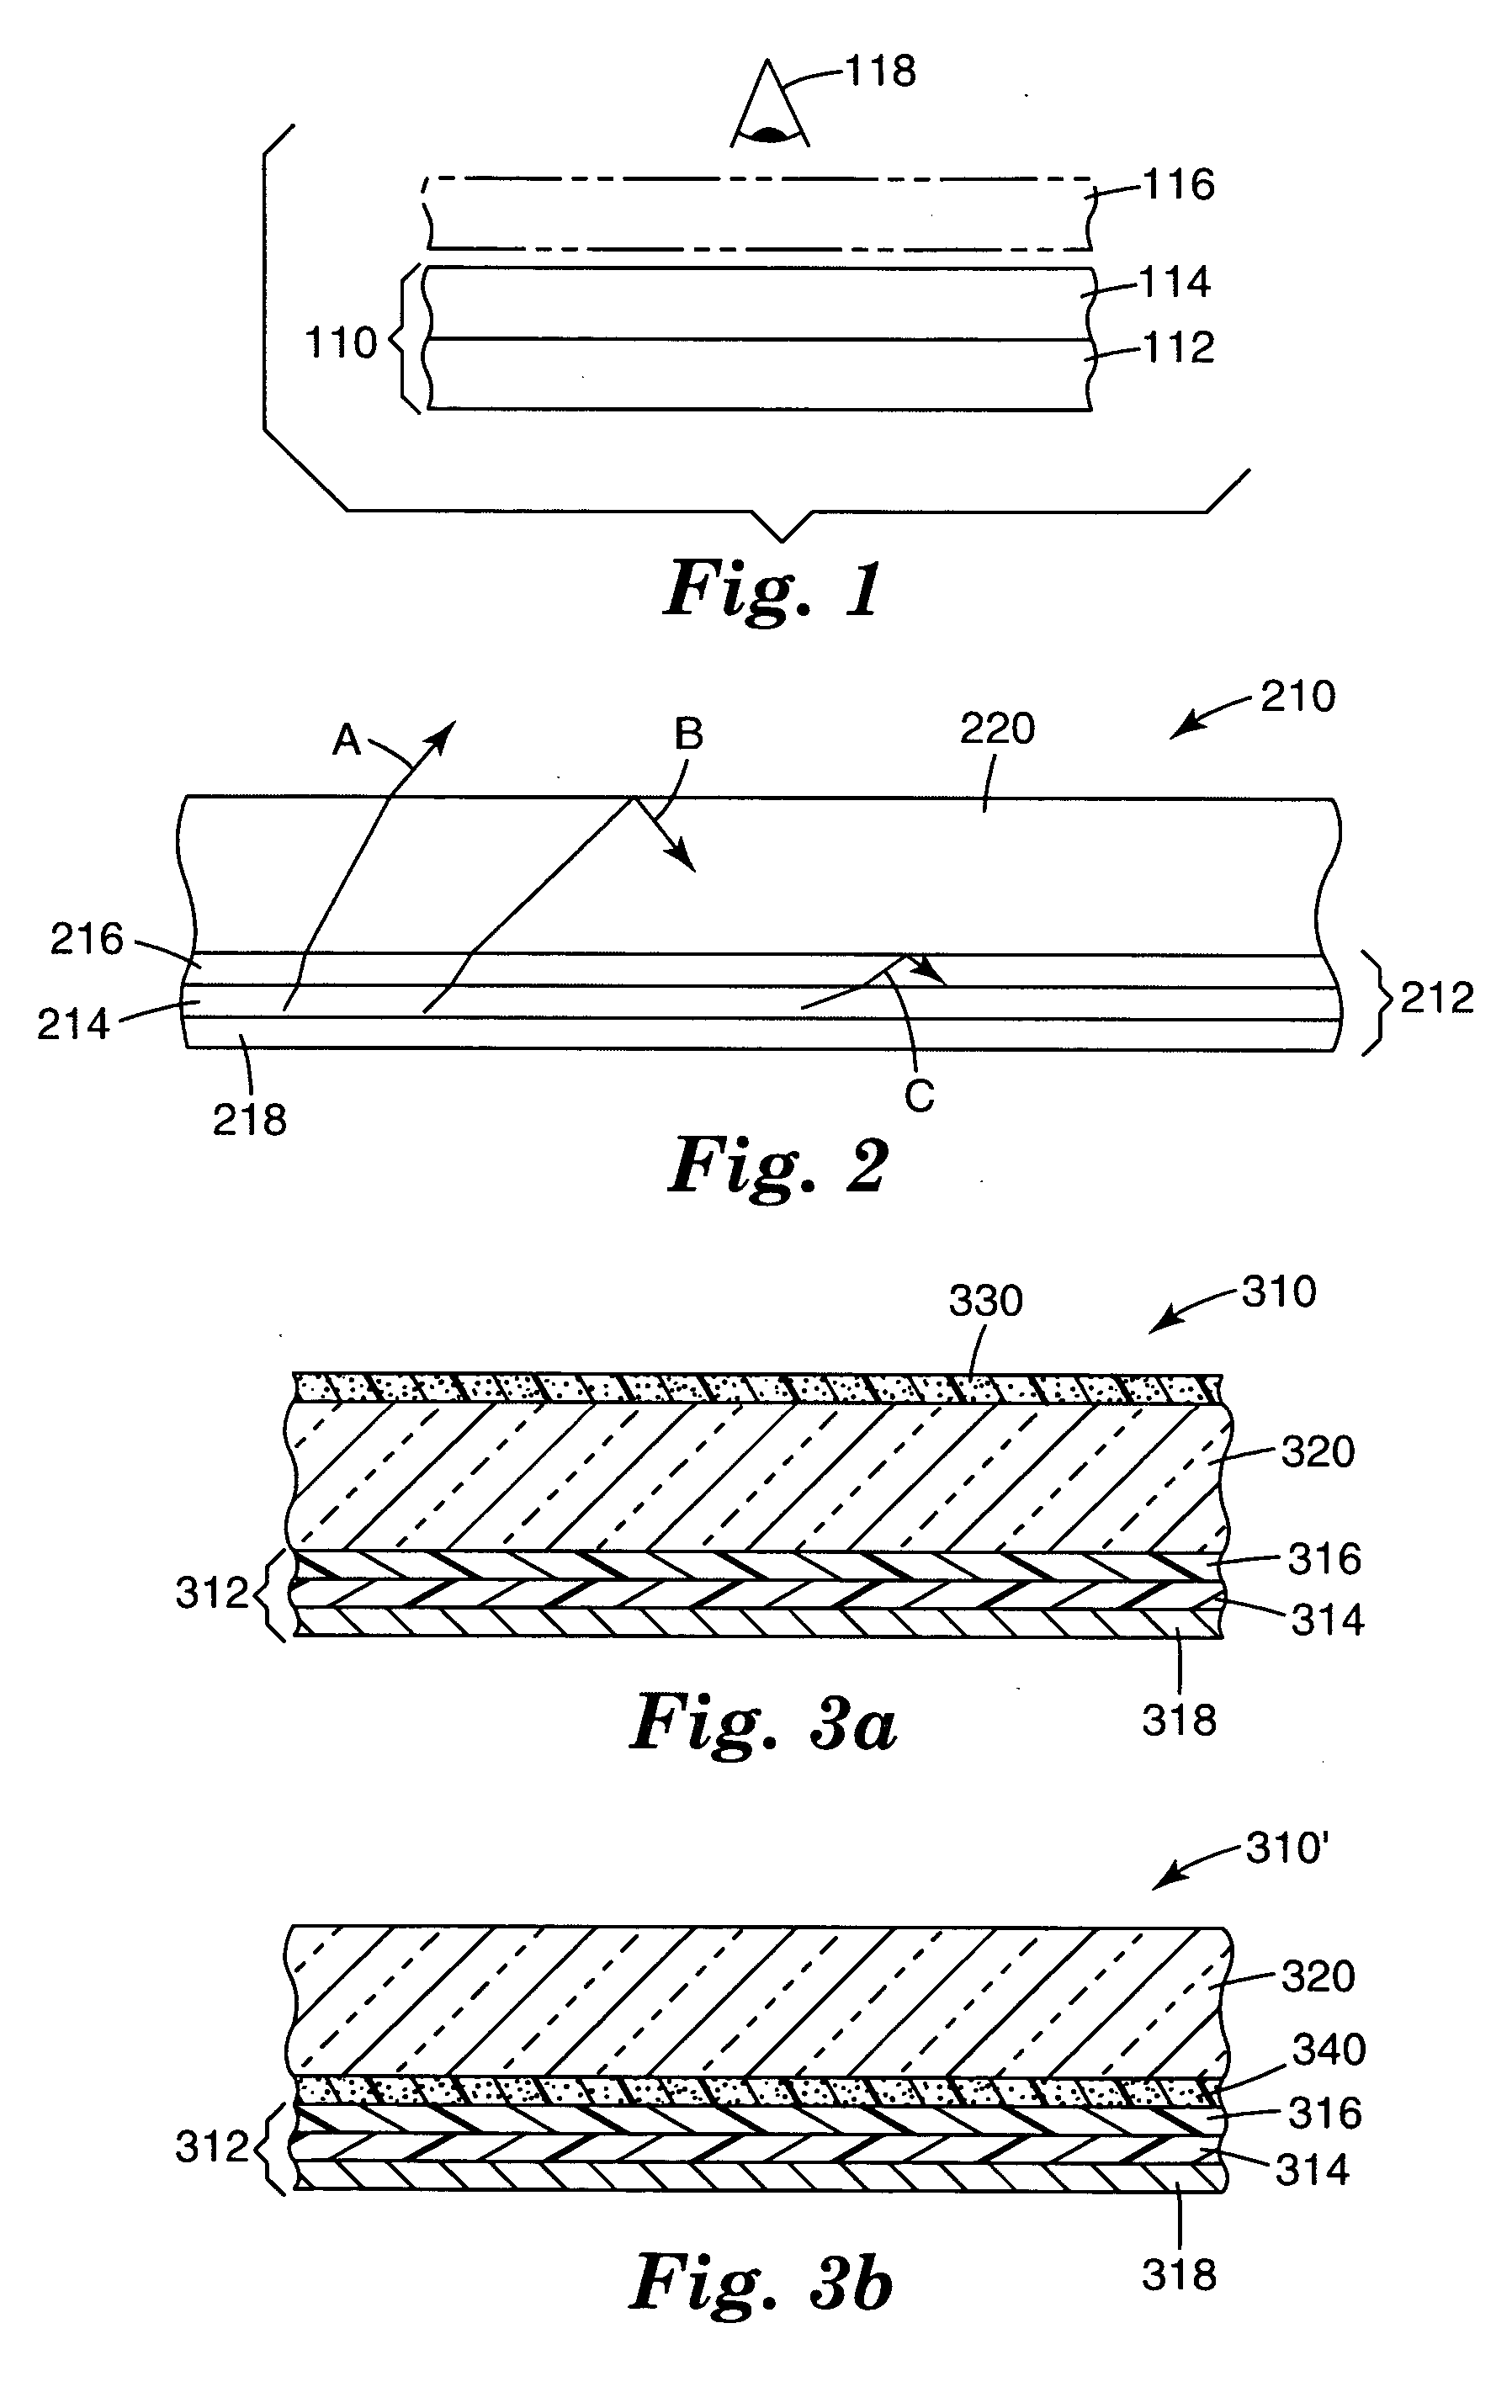 Brightness and contrast enhancement of direct view emissive displays